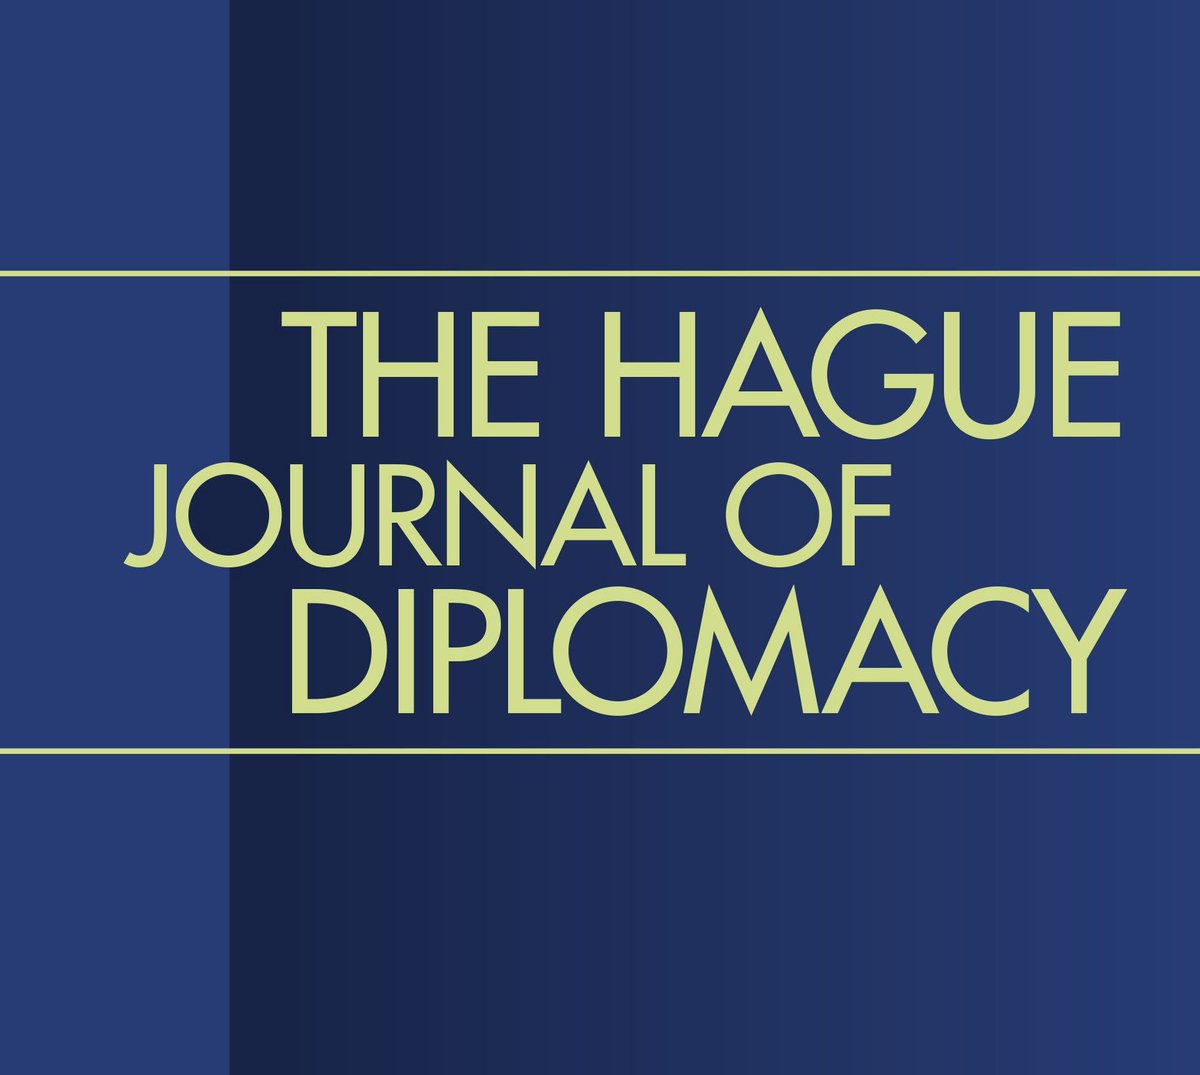 The full Editorial Team of @Hague_Jour_Dipl will be @isanet. Meet Jeremy Cornut, Marcus Holmes, Deepak Nair, Constance Duncombe, Halvard Leira, Sophie Vériter, or me, to discuss your research! @isadiplomacy @Brill_Social